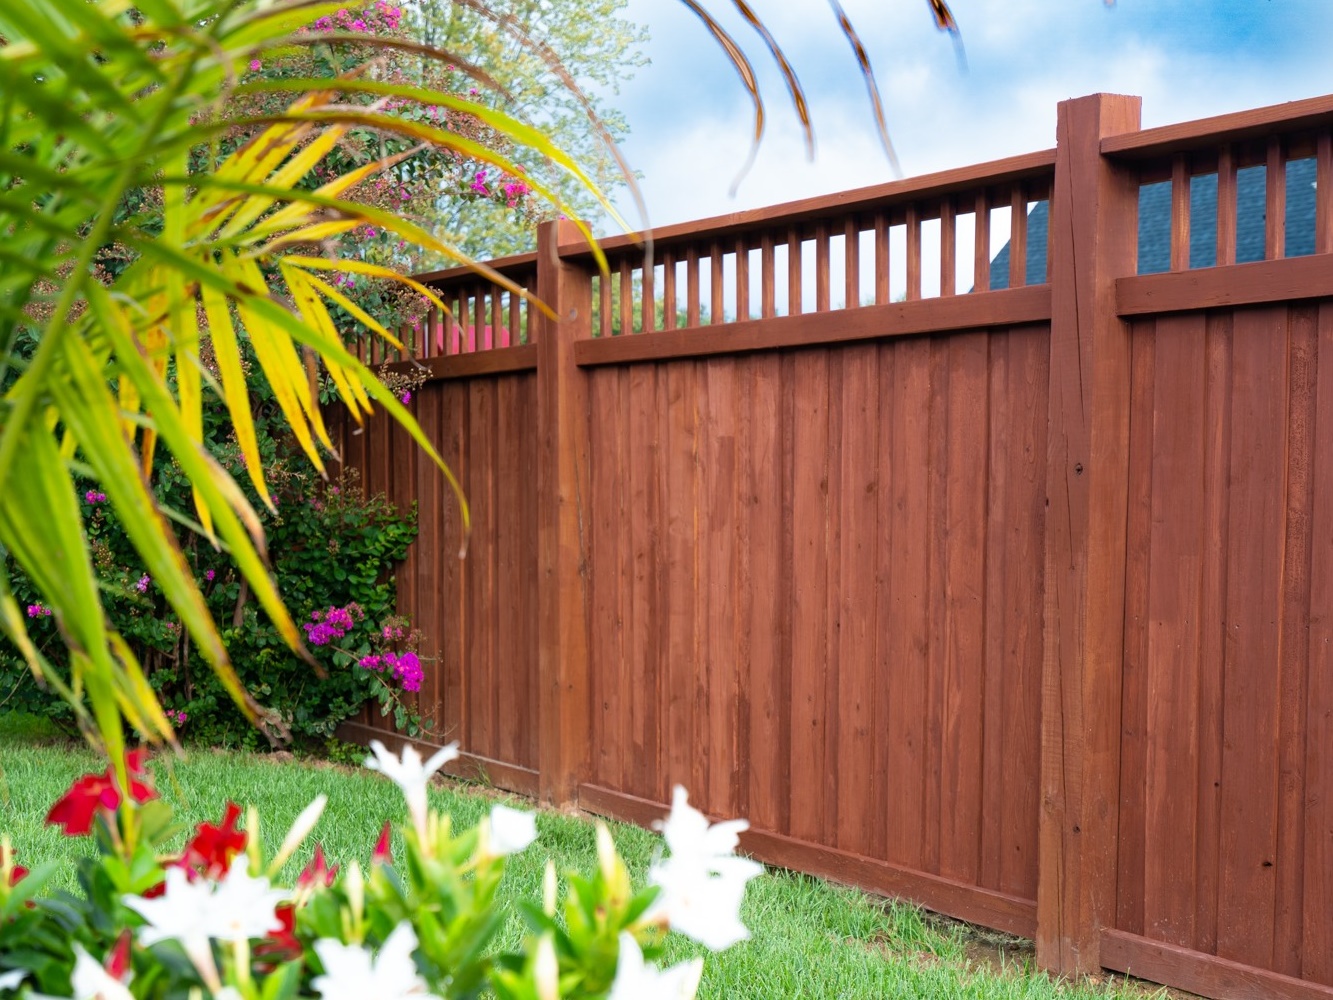 Sebree KY Spindle Top style wood fence